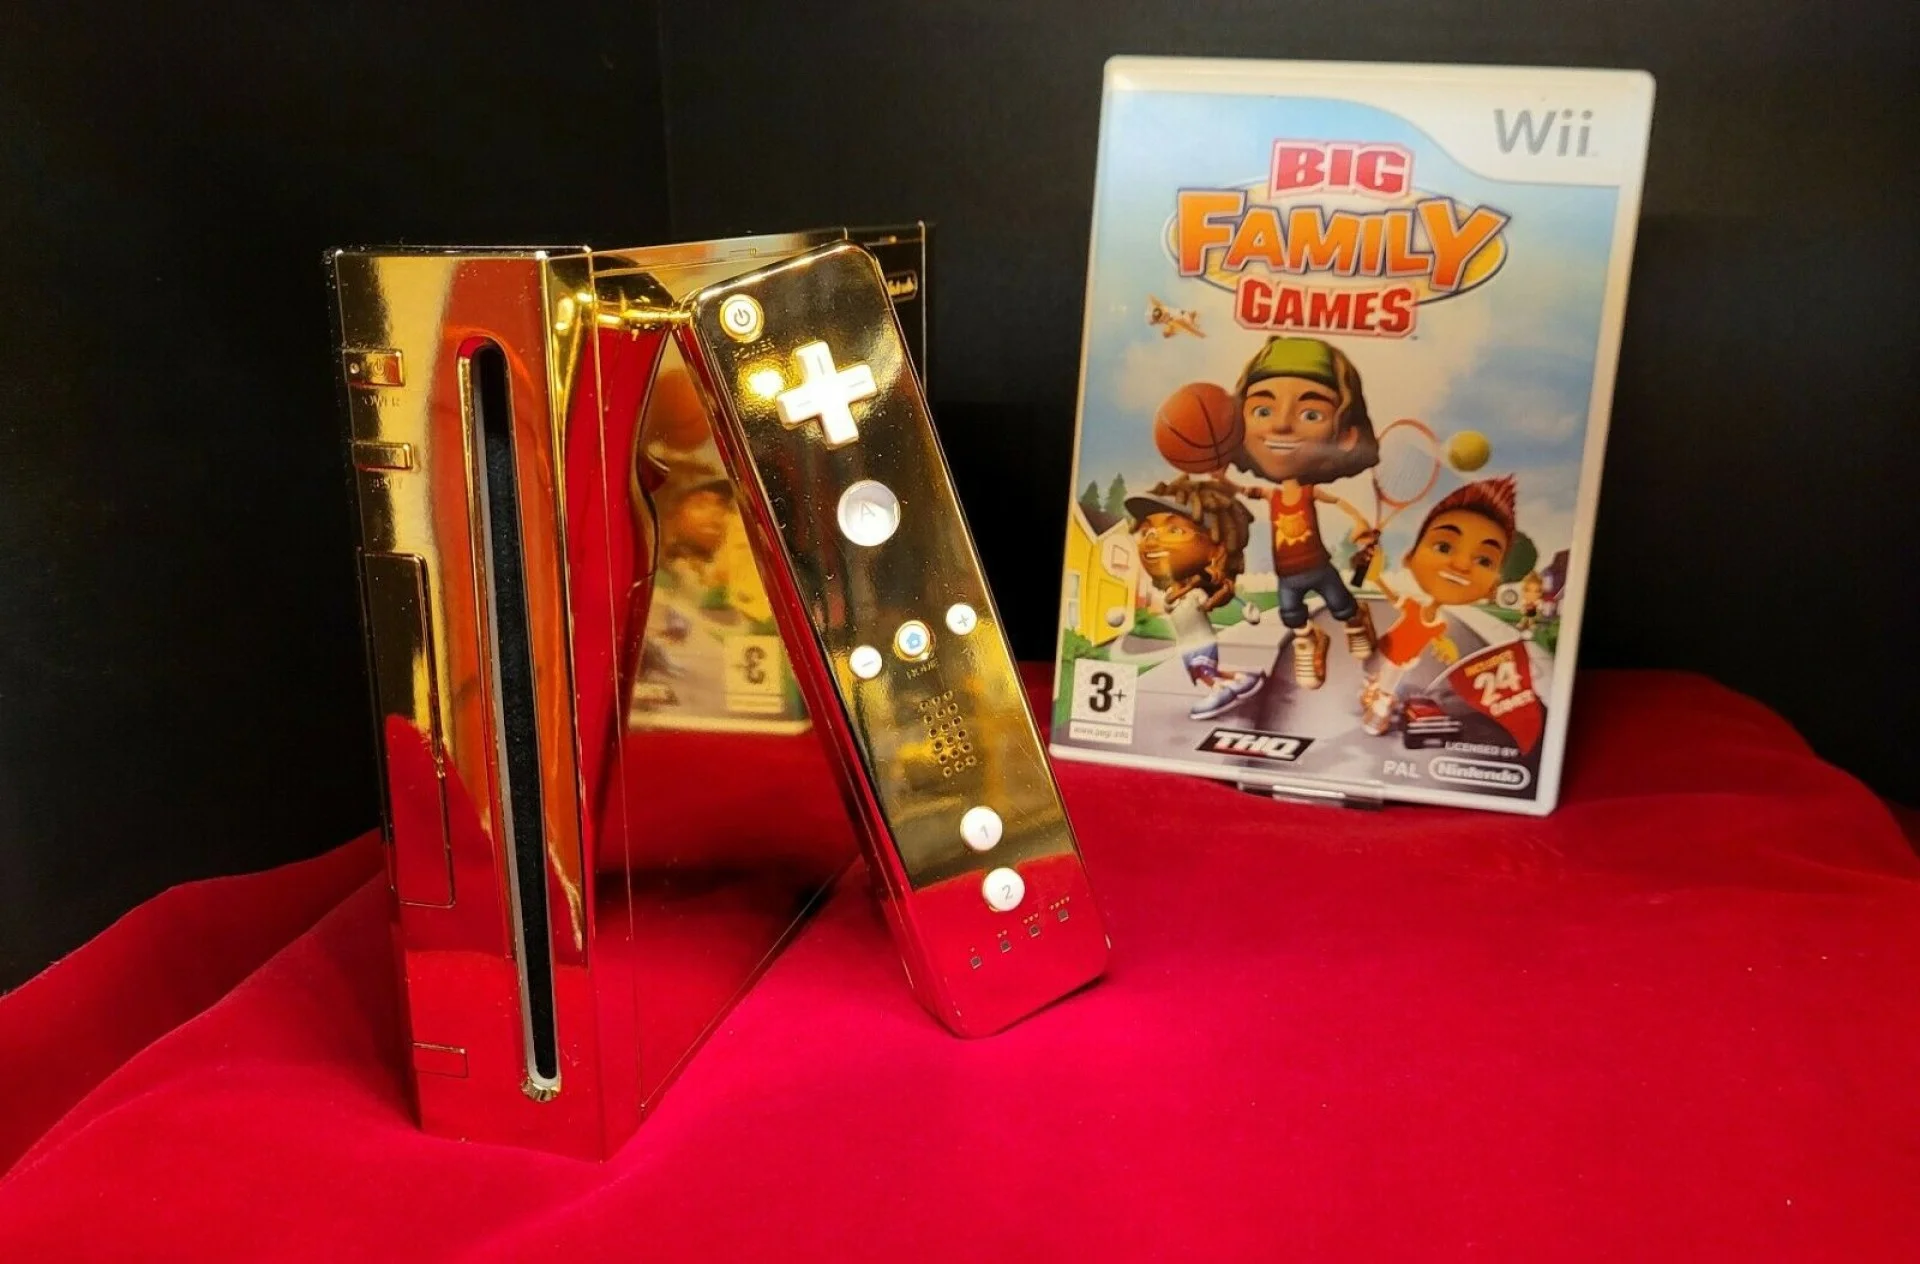 The 24K gold plated Wii made for Queen Elisabeth II is for Sale!